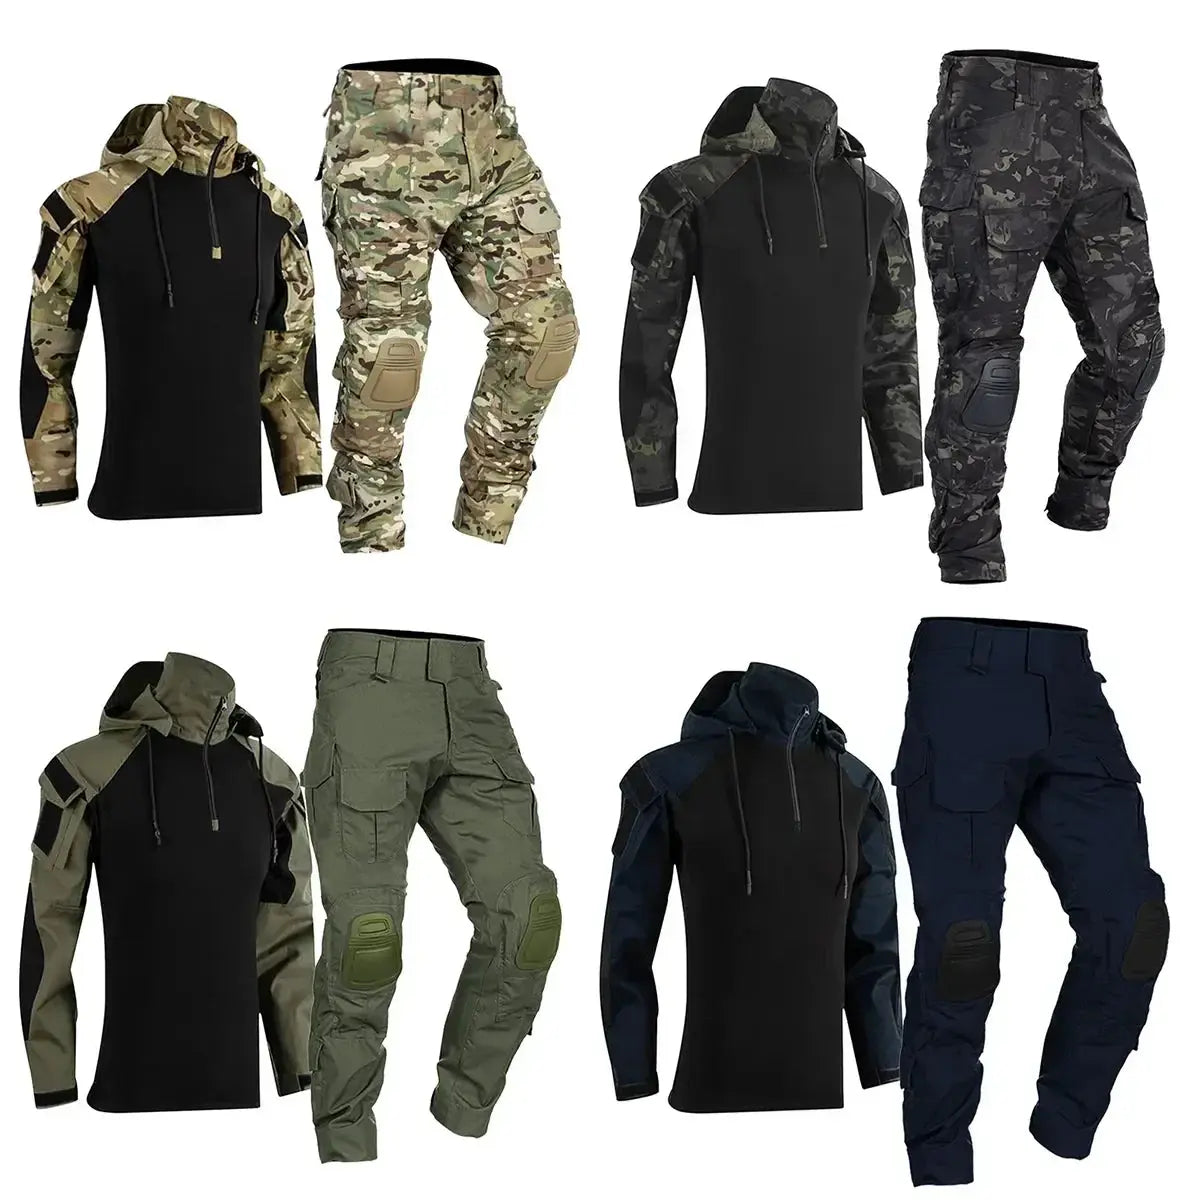 Suit Pads Army Airsoft Shirts Multicam Uniform Pants Combat Tactical Knee Cargo Work Paintball Clothing Camouflage Military Awesome Markeplace